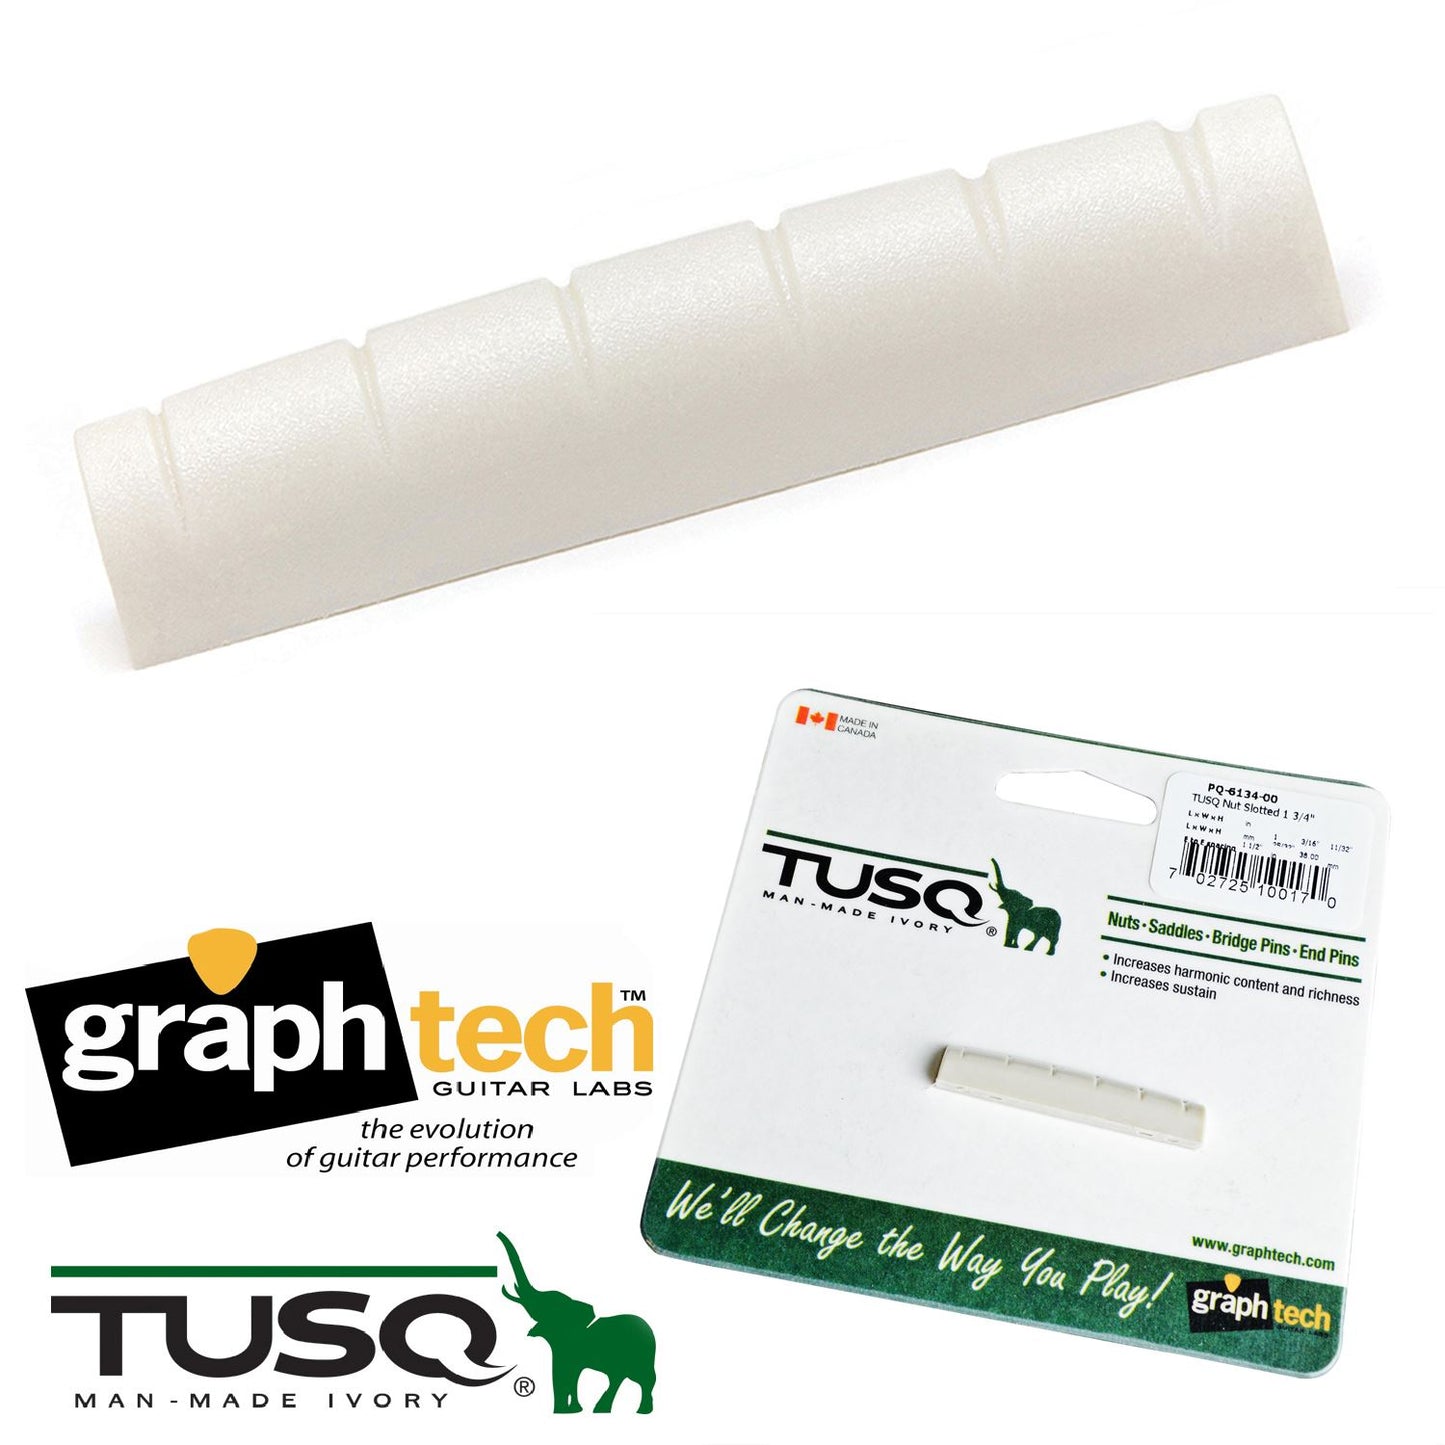 Graphtech PQ-6134-00 Slotted Tusq Nut 3/4 inch for Acoustic Guitars